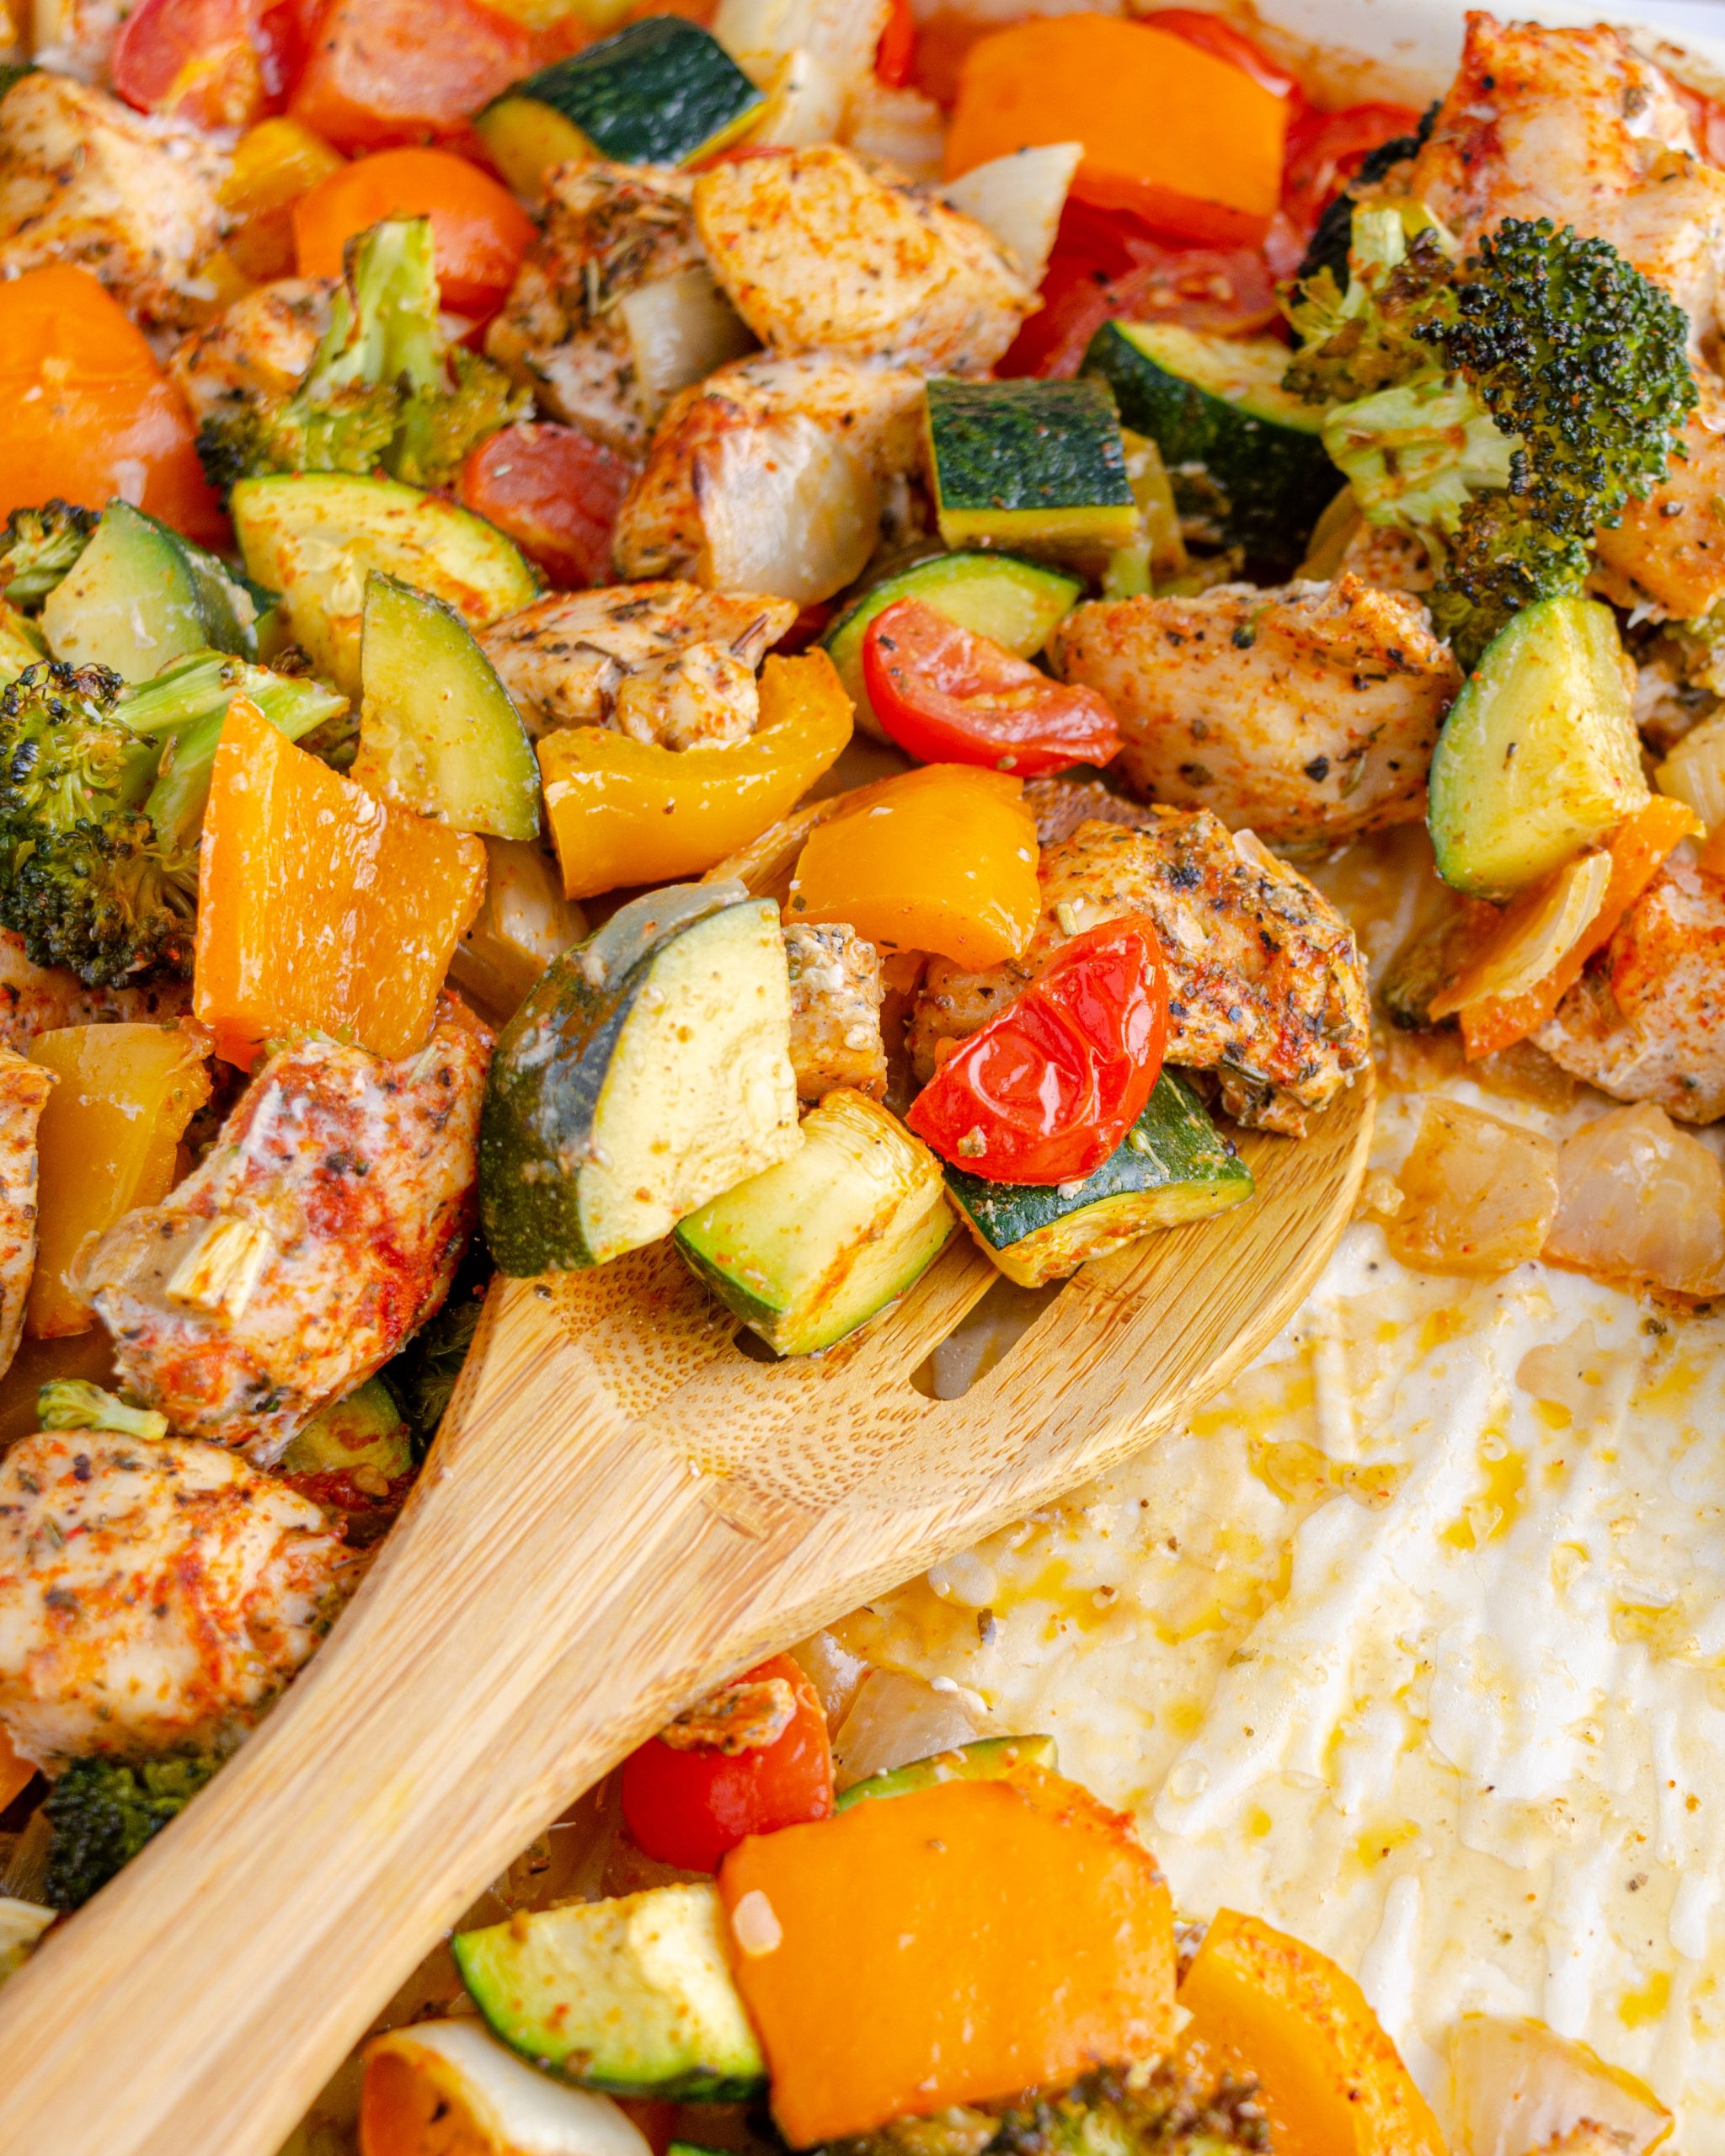 15-Minute Healthy Roasted Chicken and Veggies